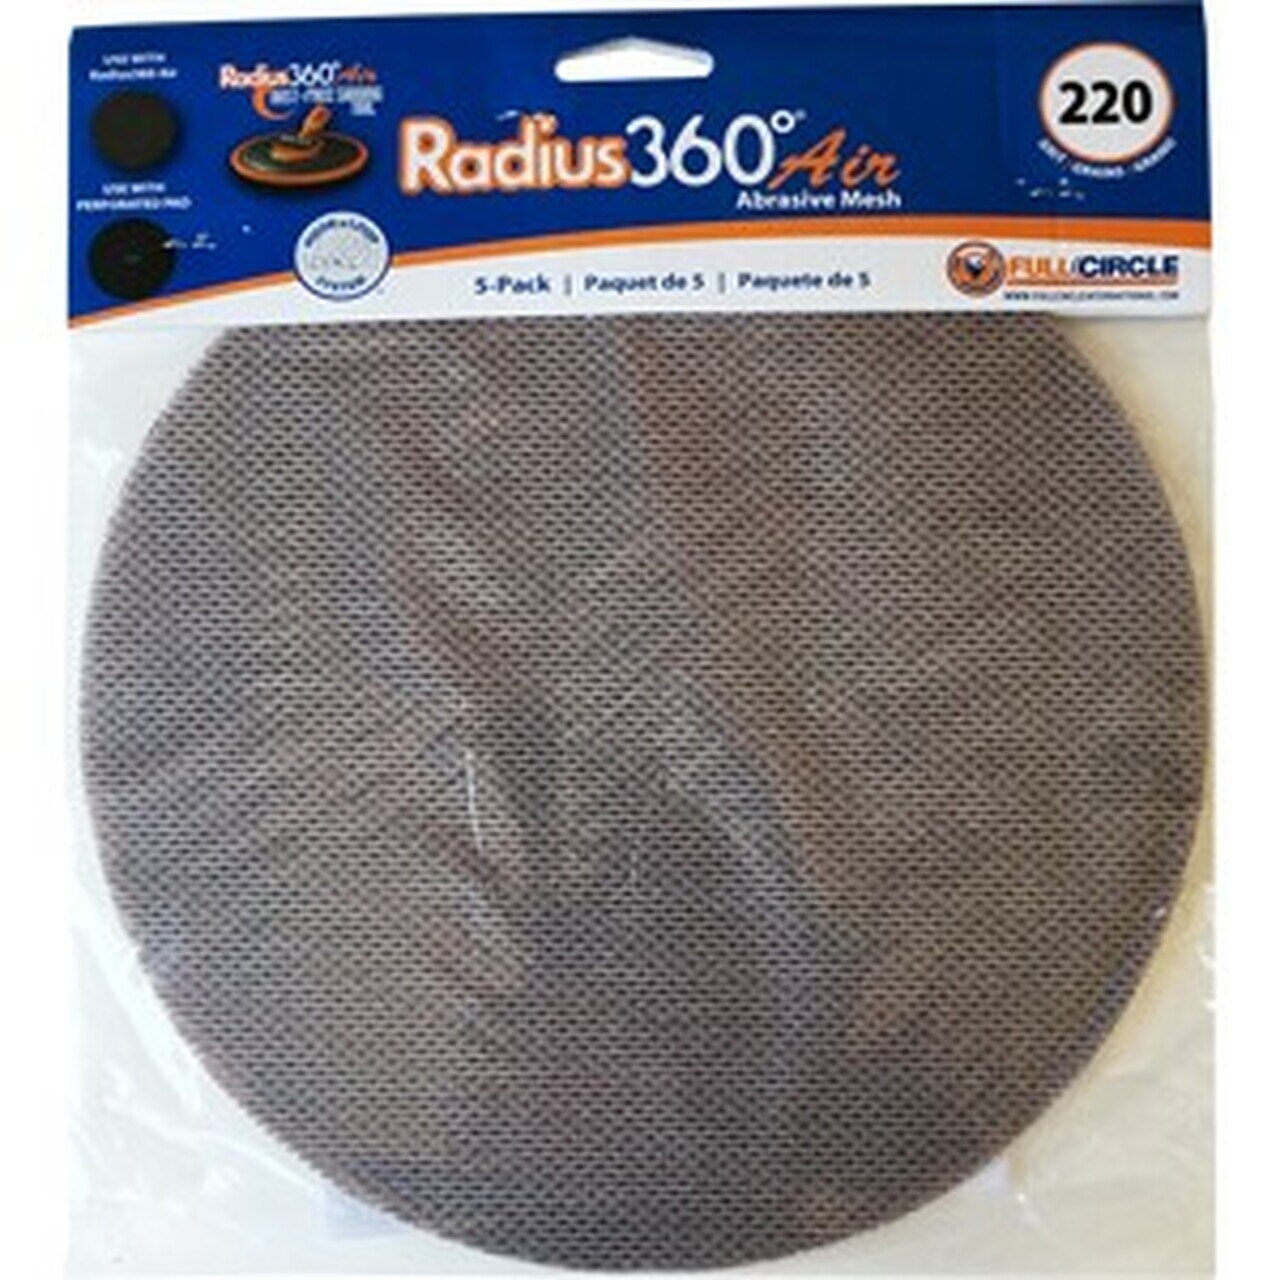 Full Circle International Mesh Abrasive SDXXX-5 8-3/4 Inch, For Radius 360 Air, 5-Pack - The Paint People